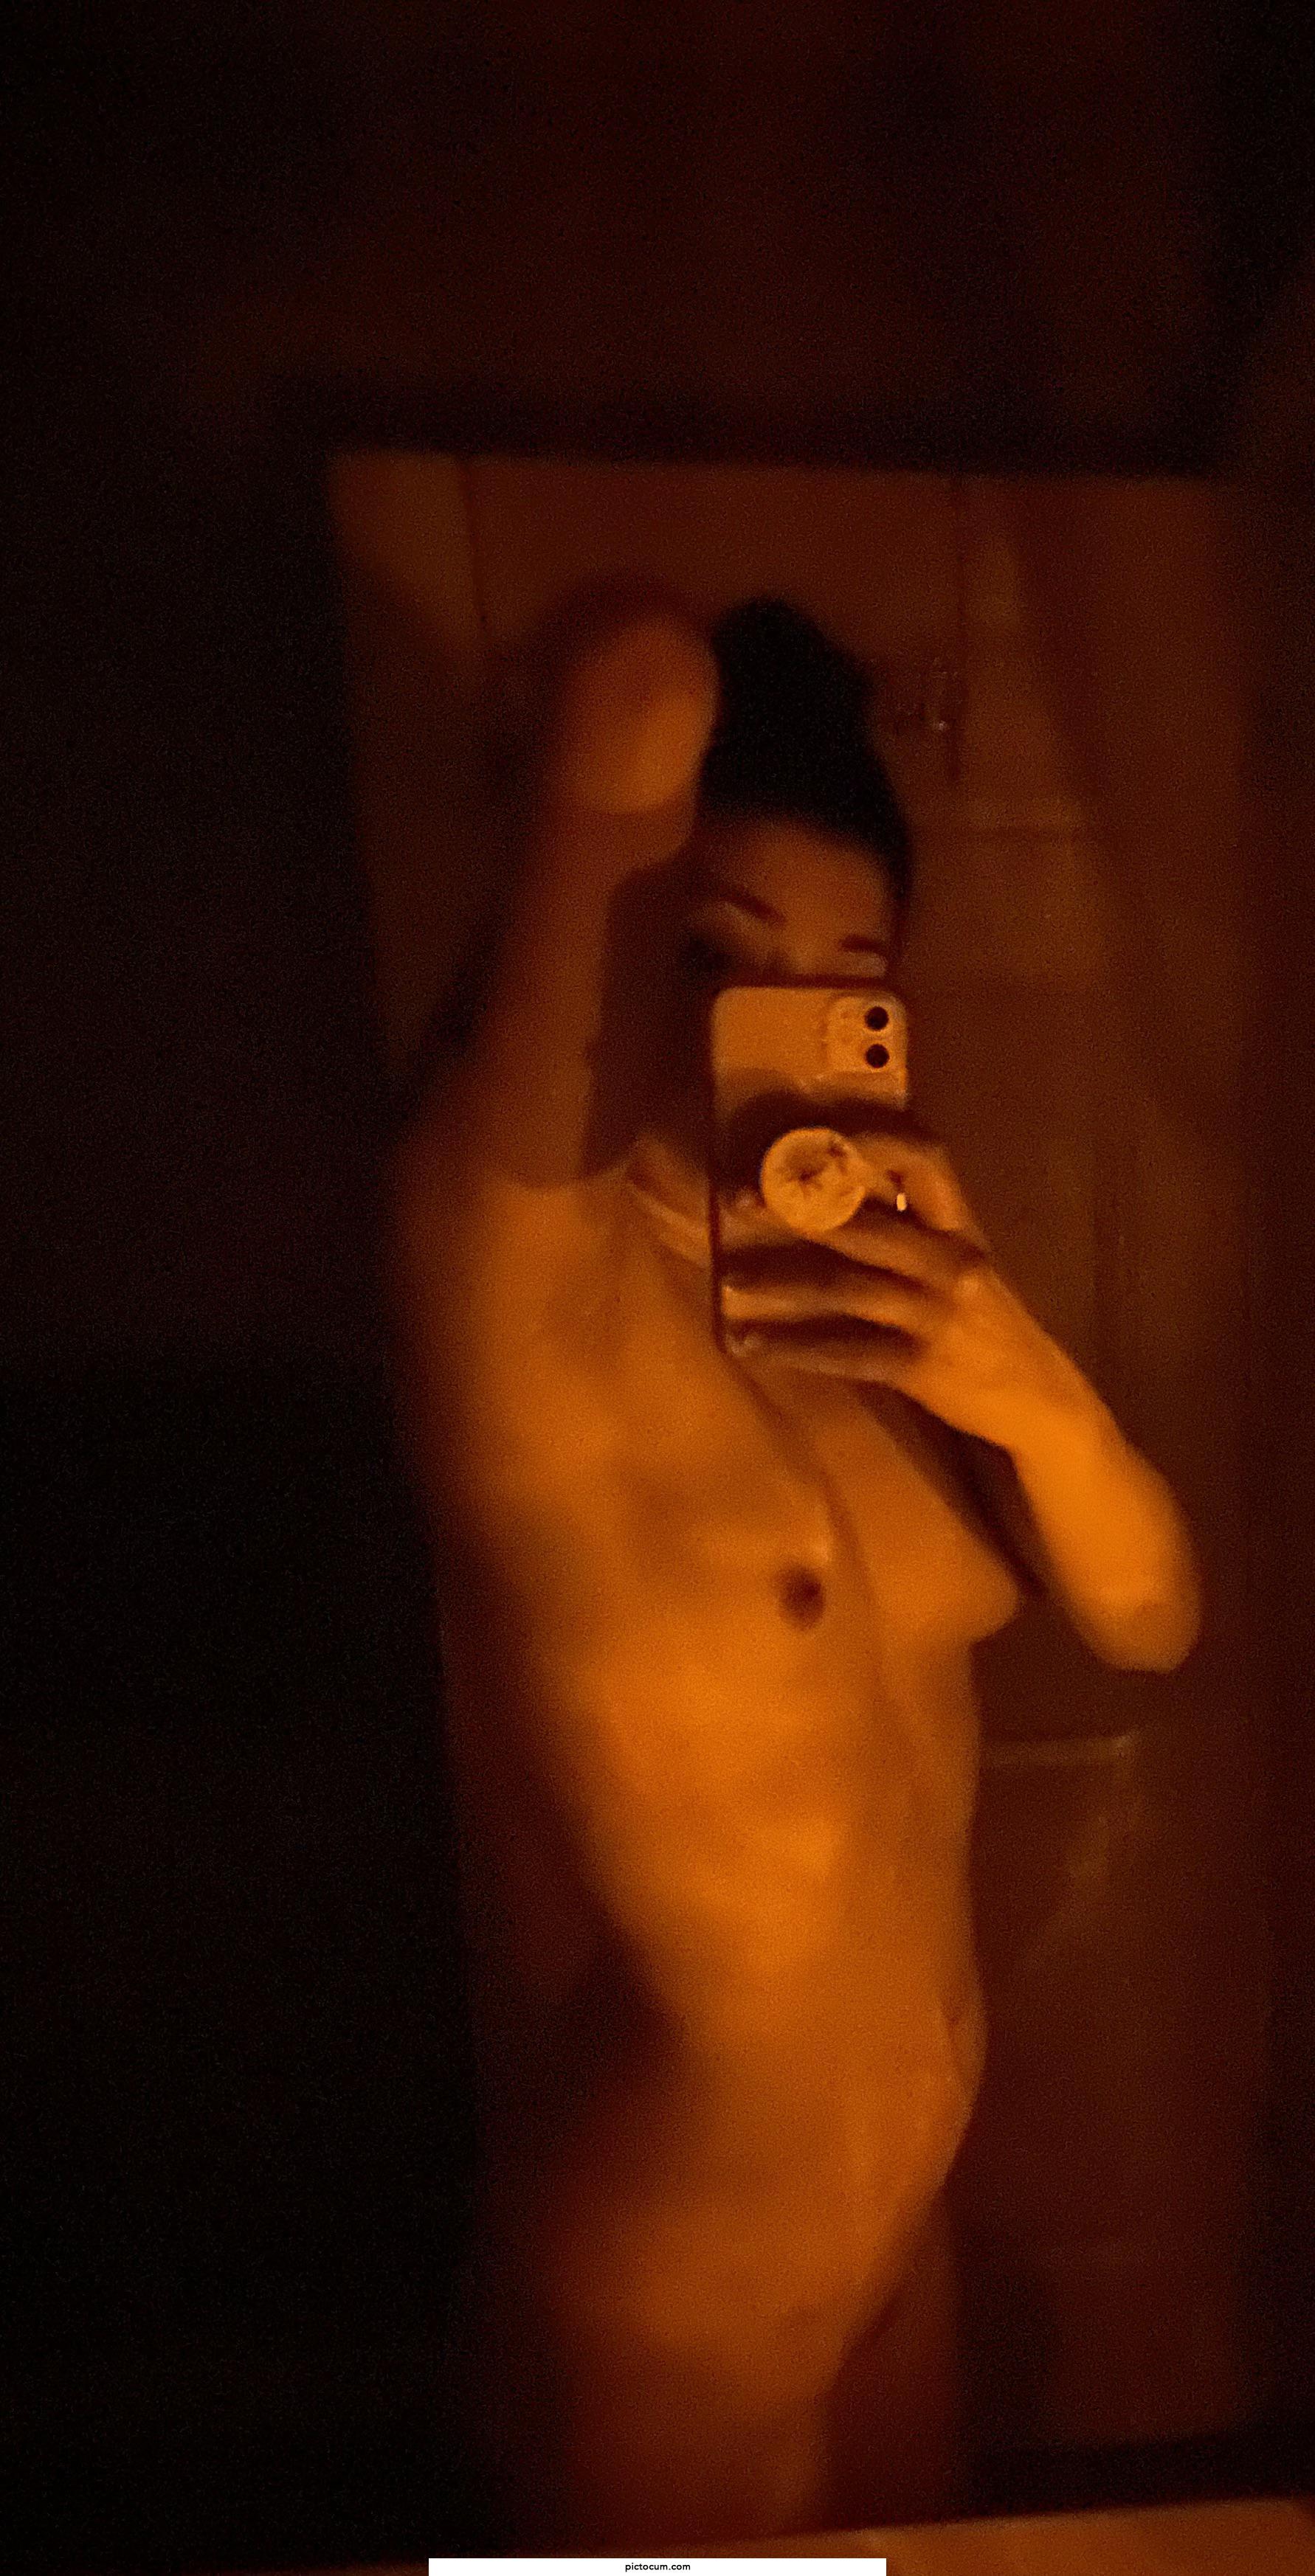 It’s my real life cake day. 34 years around the sun now. So I present an artsy nude with a bit more than I normally show. Also no, you can’t lick my armpit that one guy.